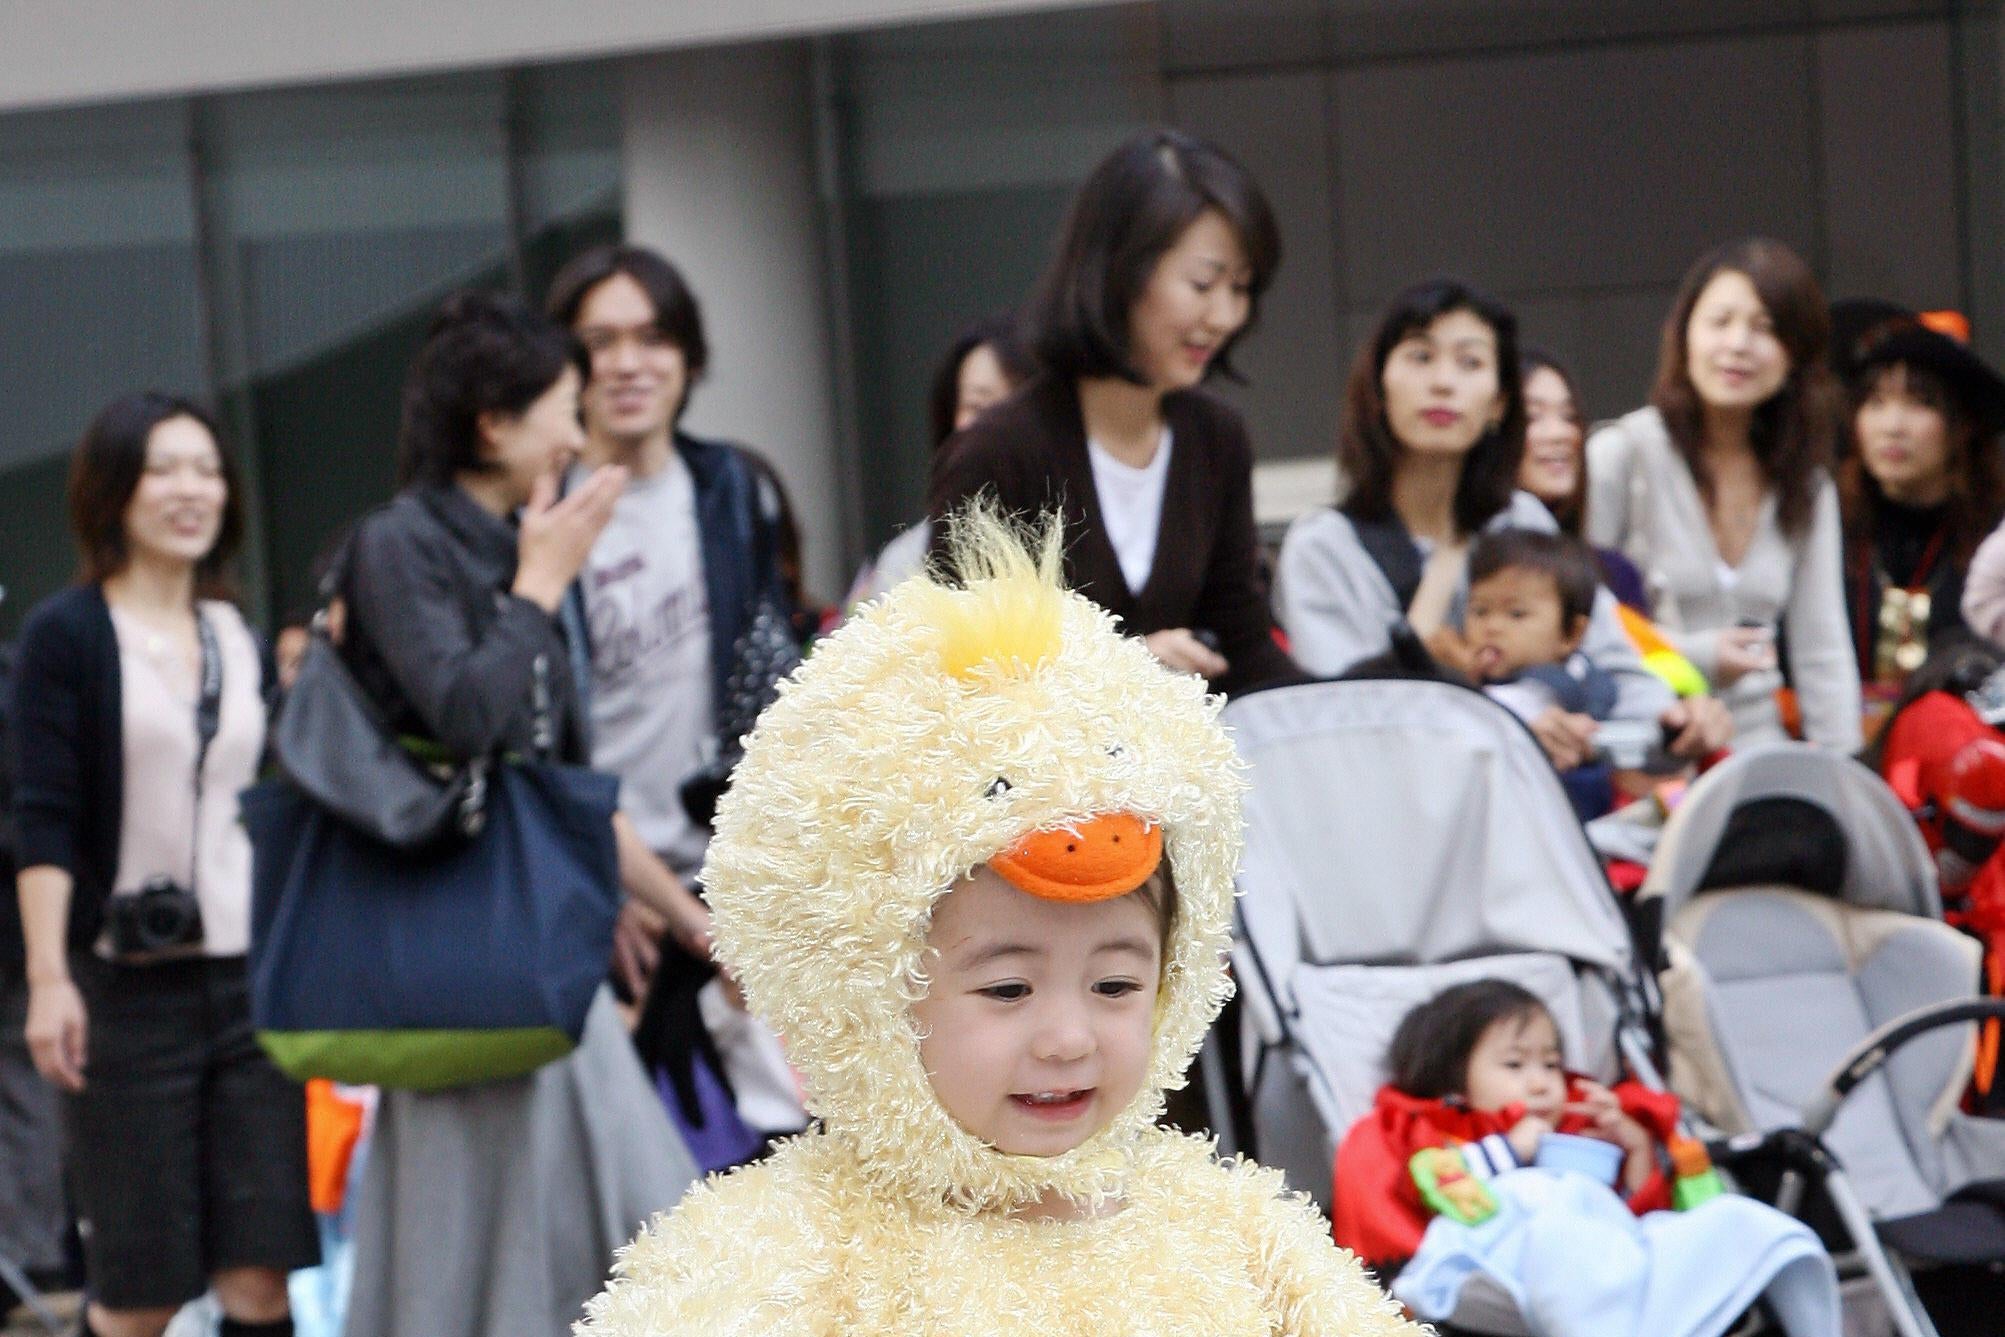 A little girl dressed as a baby chicken.